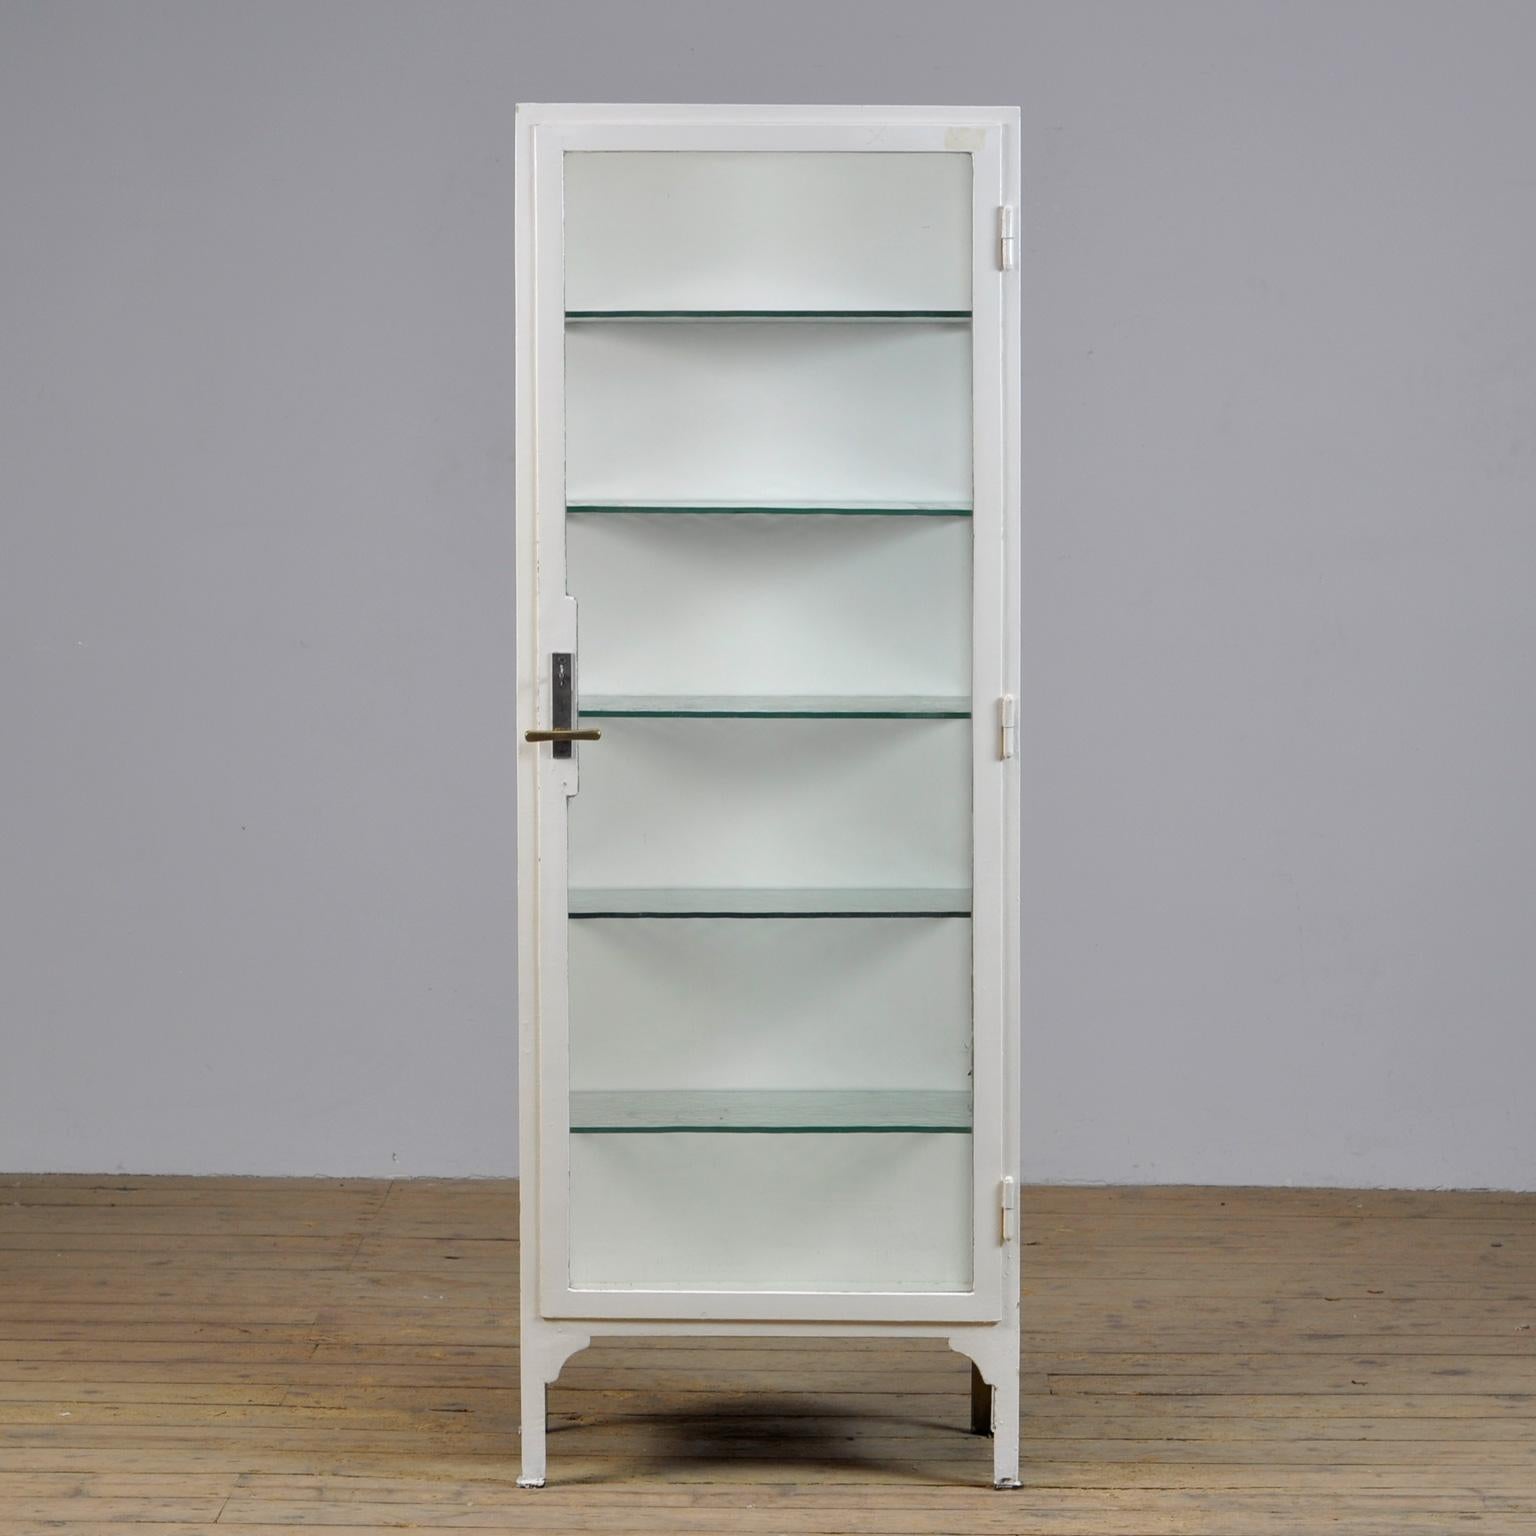 Medical cabinet from the 1930s. The cabinet is produced in hungary and is made of thick iron and antique glass. With the original glass shelves of 8mm thick. The glass plates have a green tint. The lock and handle are also original and functional. 